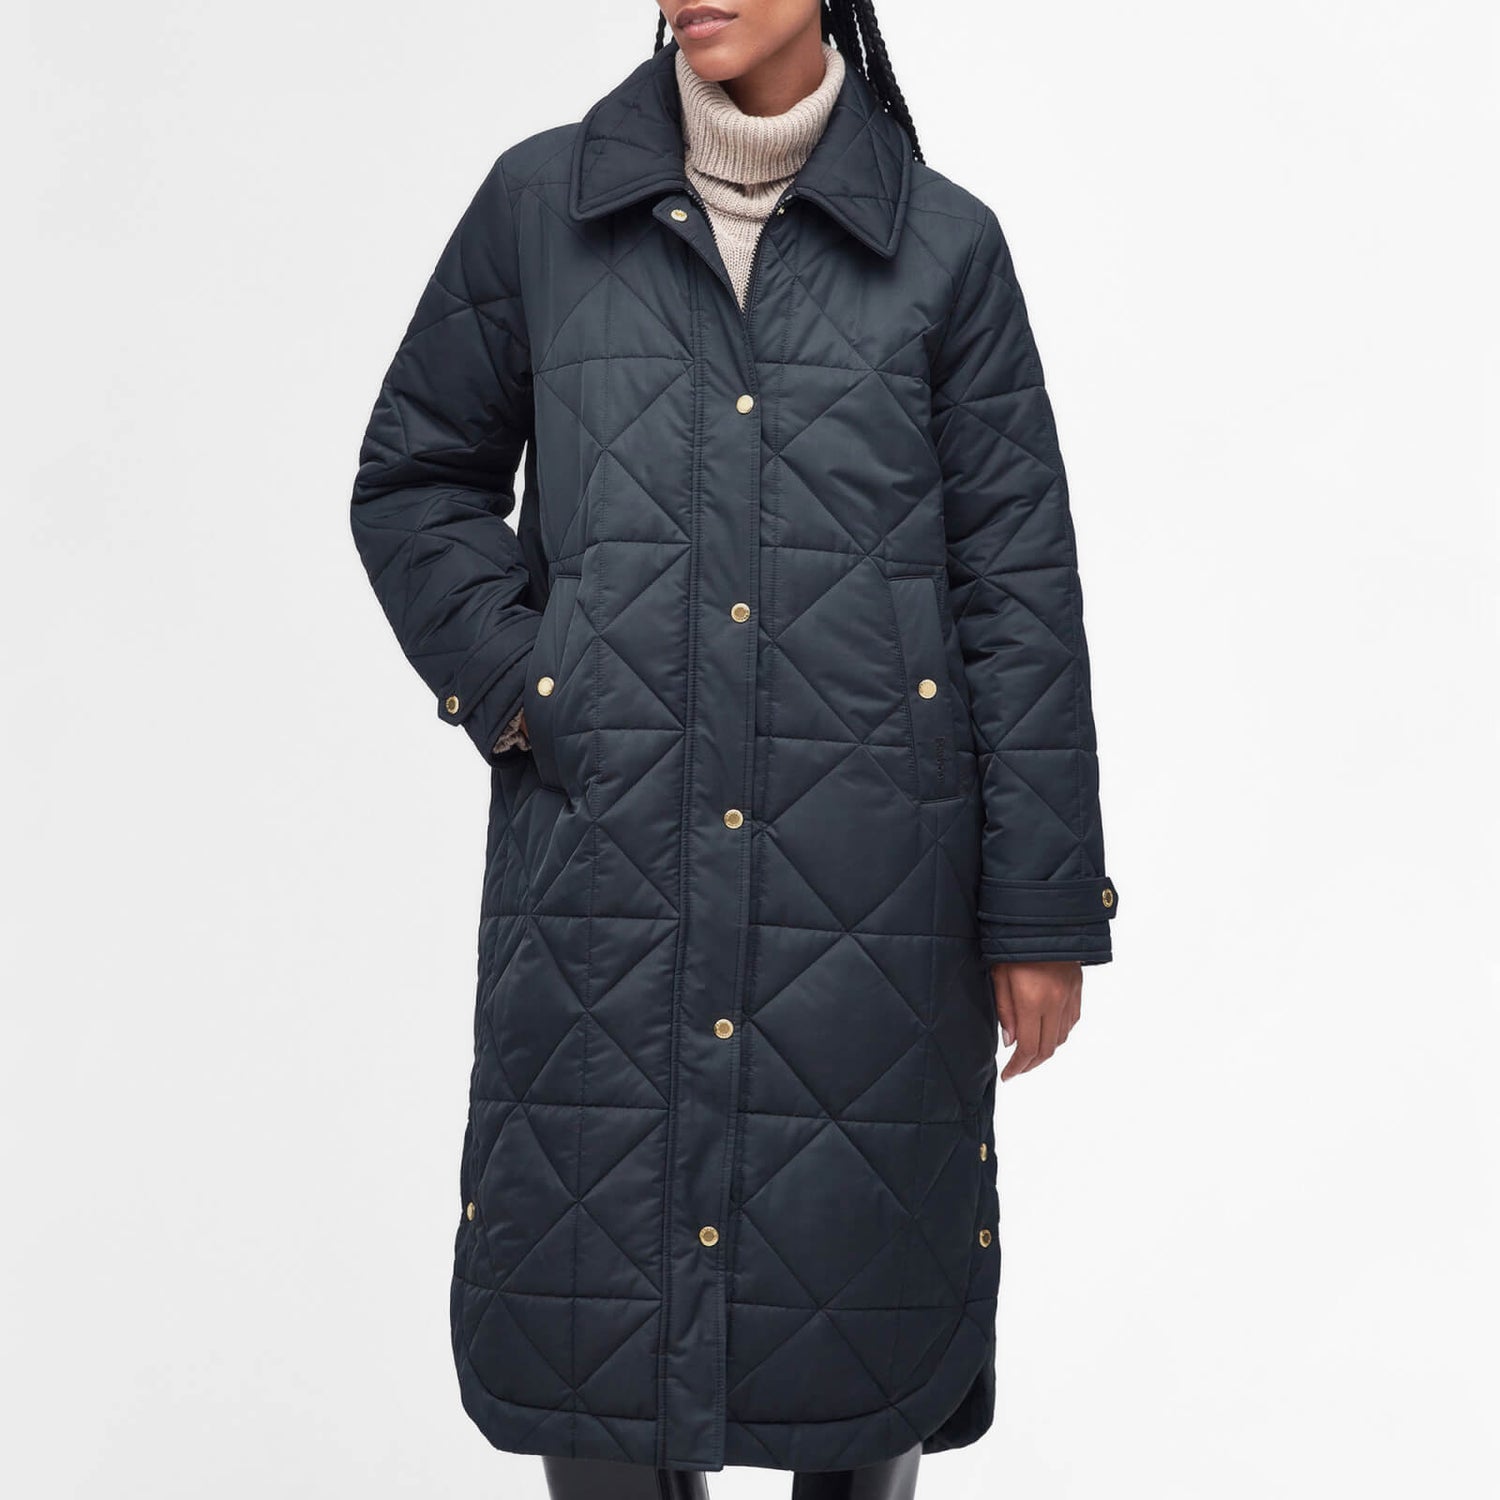 Barbour Carolina Quilted Shell Coat - UK 8